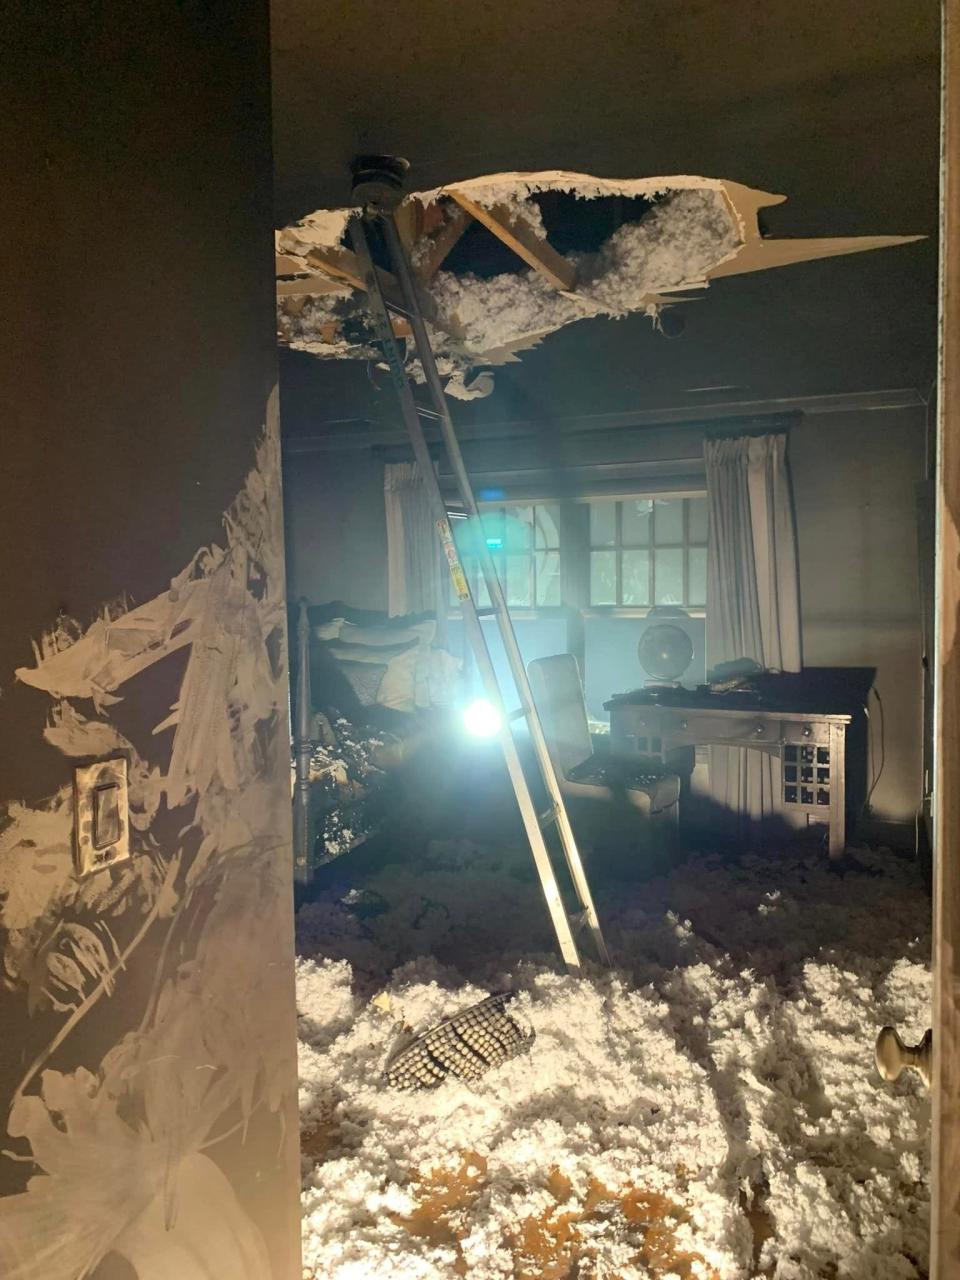 Leitersburg Fire Chief Kirk Mongan said the homeowners took the correct actions in responding to an alarm, by reclosing the bedroom door and evacuating.